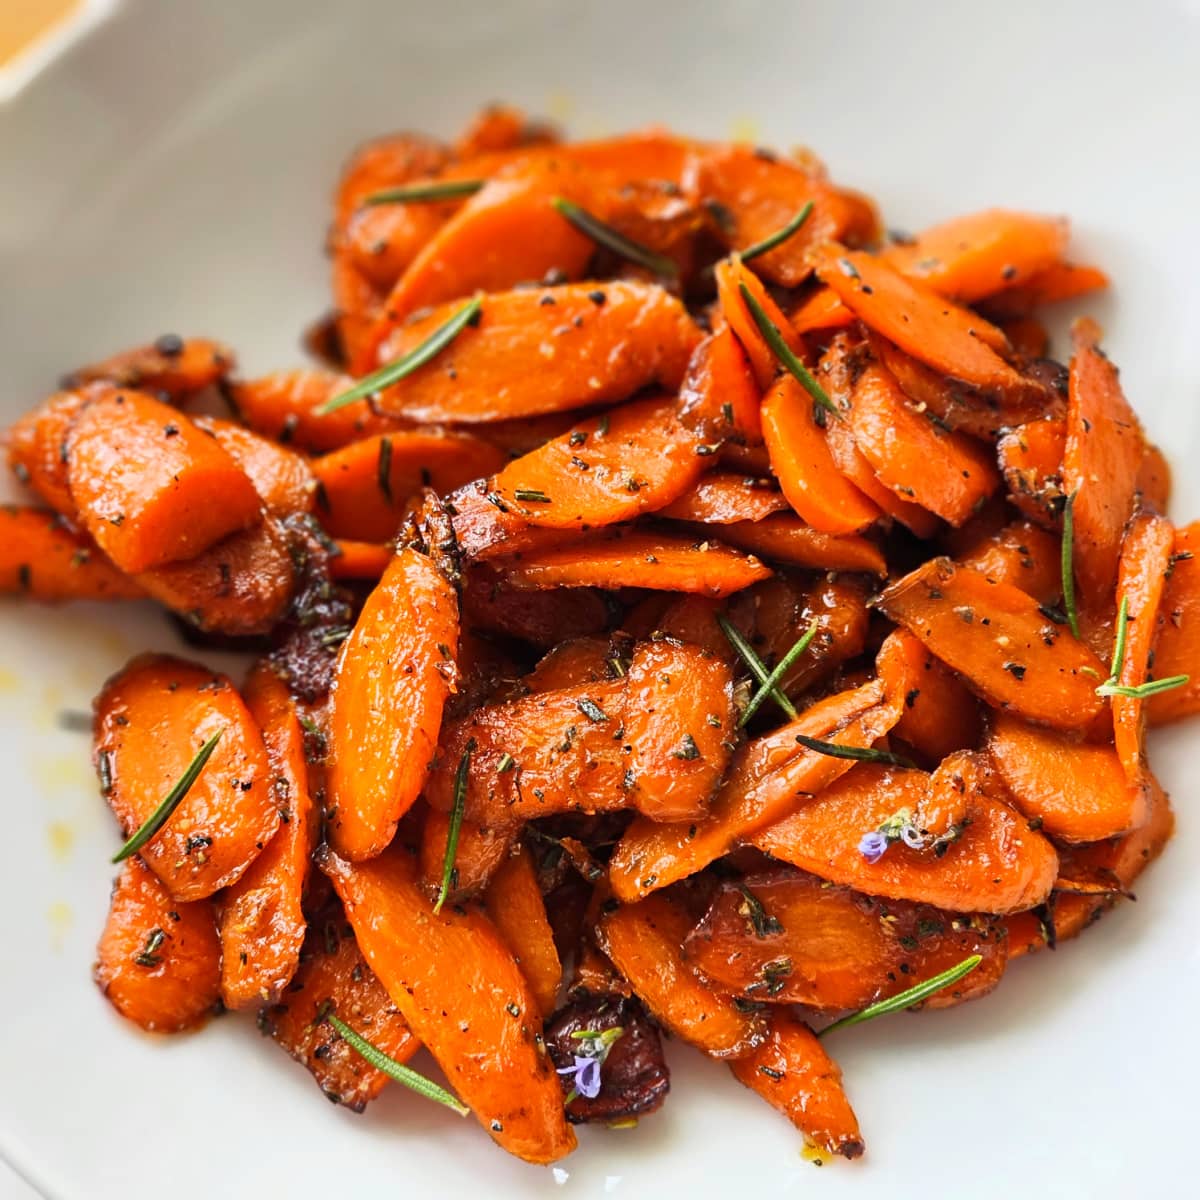 Bright orange cooked carrots flecked with rosemary in a white bowl.